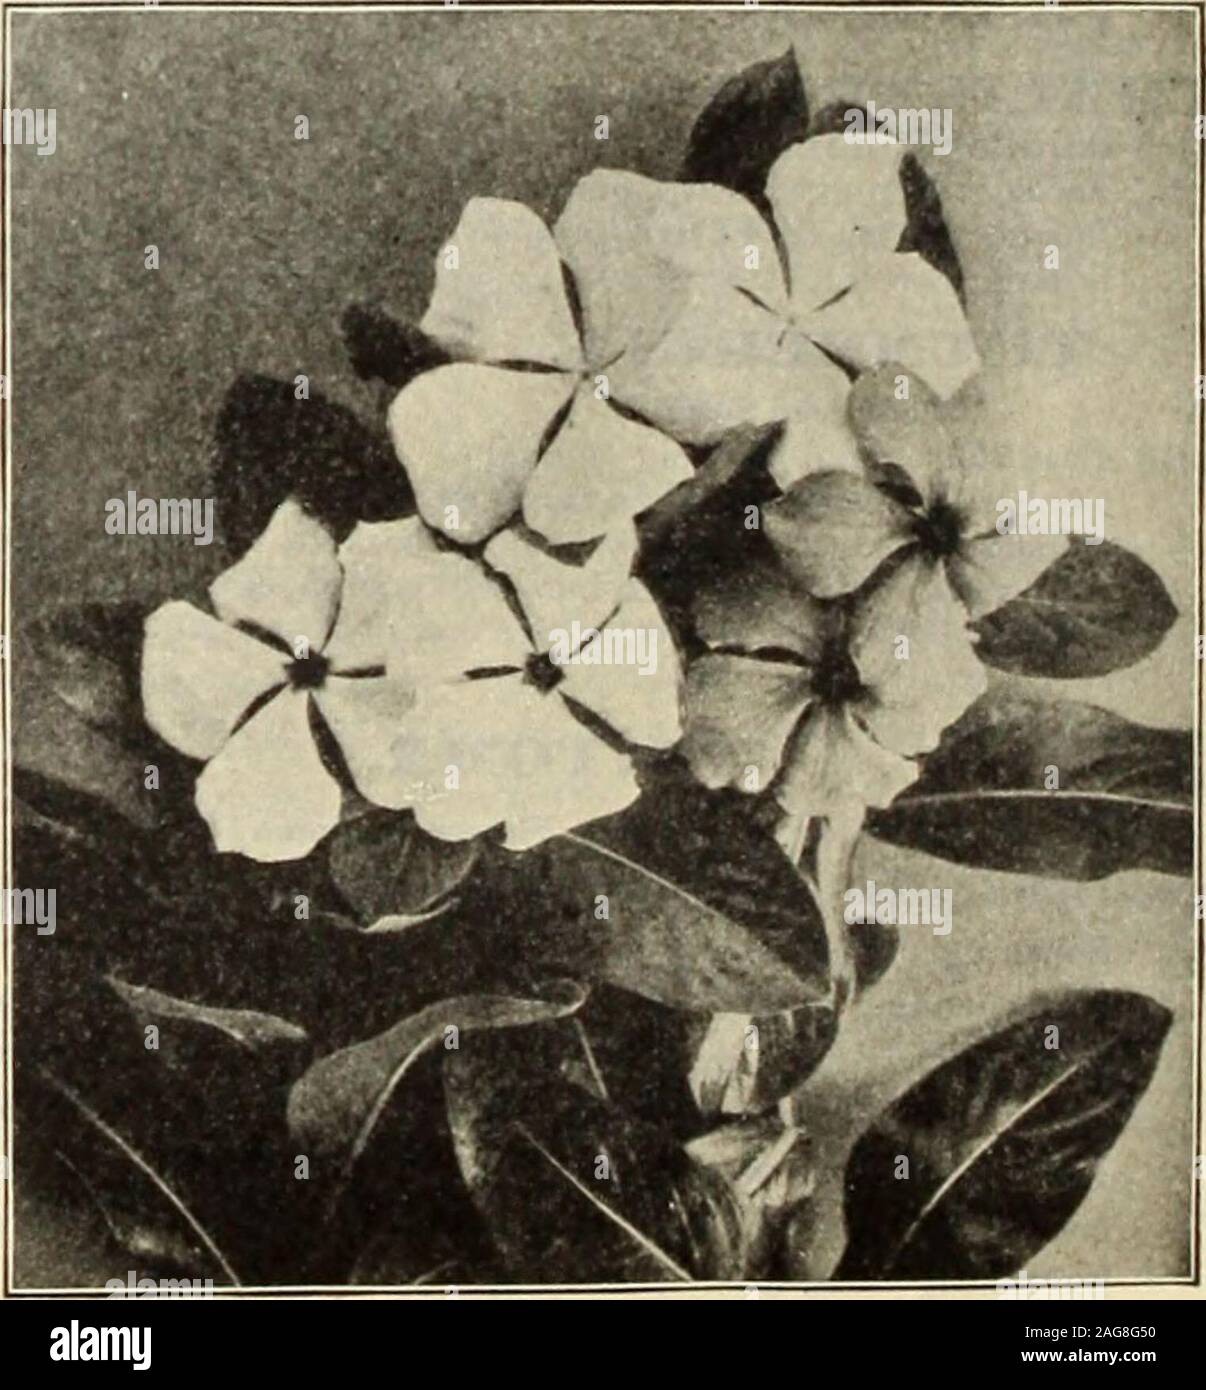 . Dreer's 1913 garden book. mon Verbena (Aloysia Citriodora). Everygarden should have a few plants of this fragrant favor-ite. Its pale green delightfully scented foliage goeswell with any flower 10 4365 Erlnoides (.Voss Verbena). This lovely varietyproduces amass of moss-like foliage, spreading overthe ground like a carpet, above which are borne headsof purplish-blue blossoms in lavish profusion; comesinto flower in June and continues until frost. For beds,baskets or rockeries it is highly desirable 10 4364 — Alba. The pure white form and a great favorite in many of the finest gardens 10 4367 Stock Photo